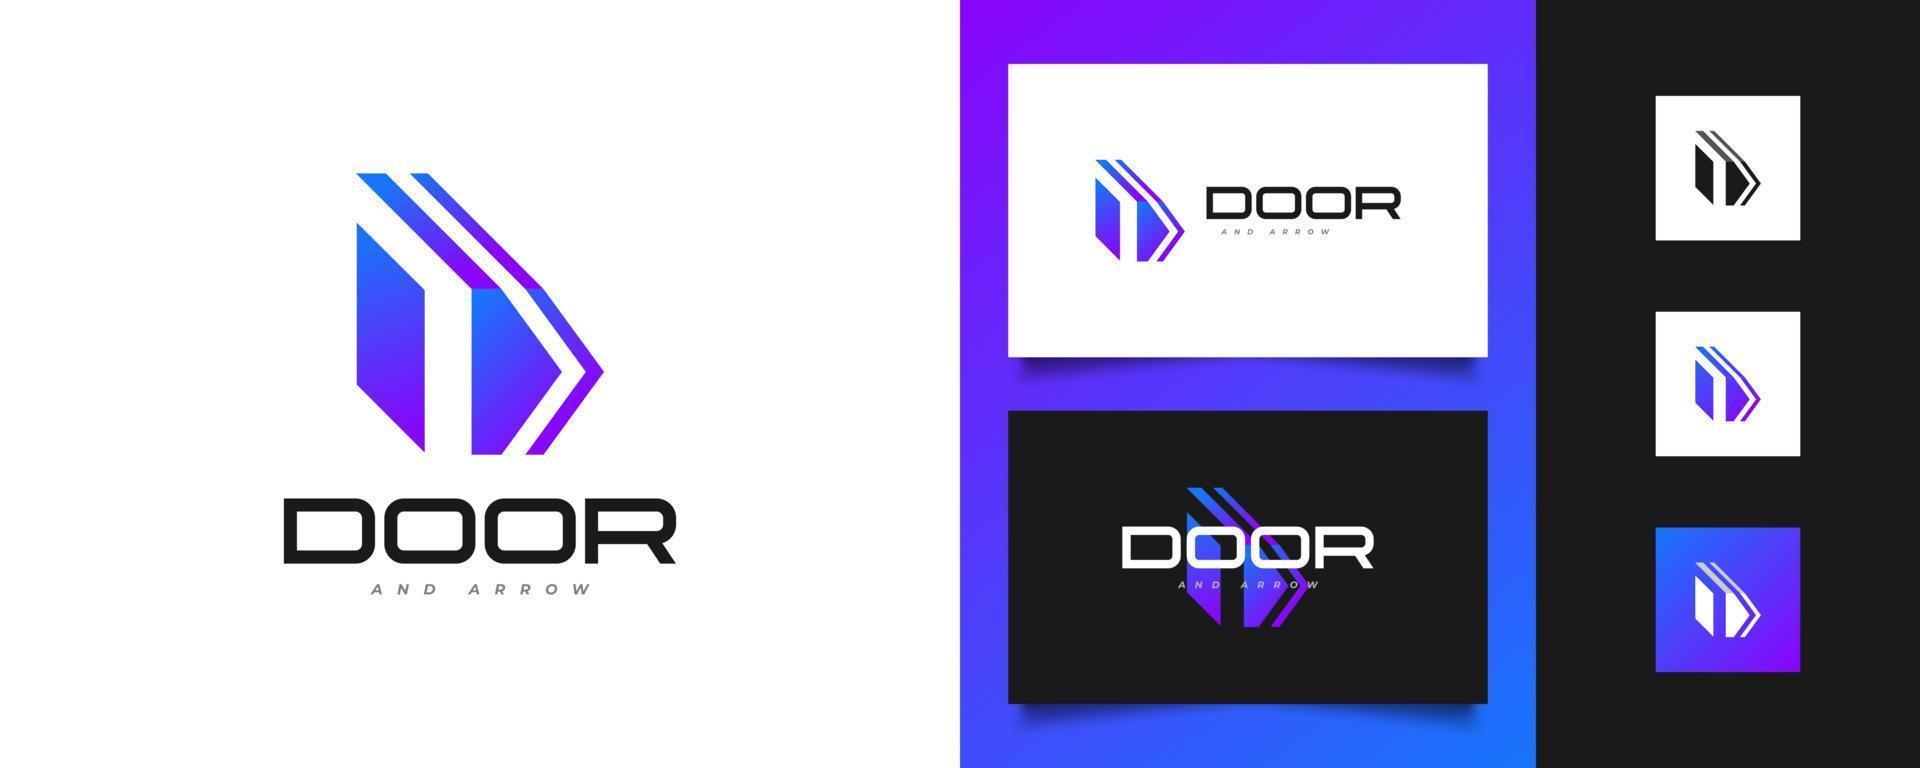 Arrow Logo with Initial D Shaped Door. Modern Right Arrow Logo or Icon with Initial Letter D for Business or Technology Logo vector